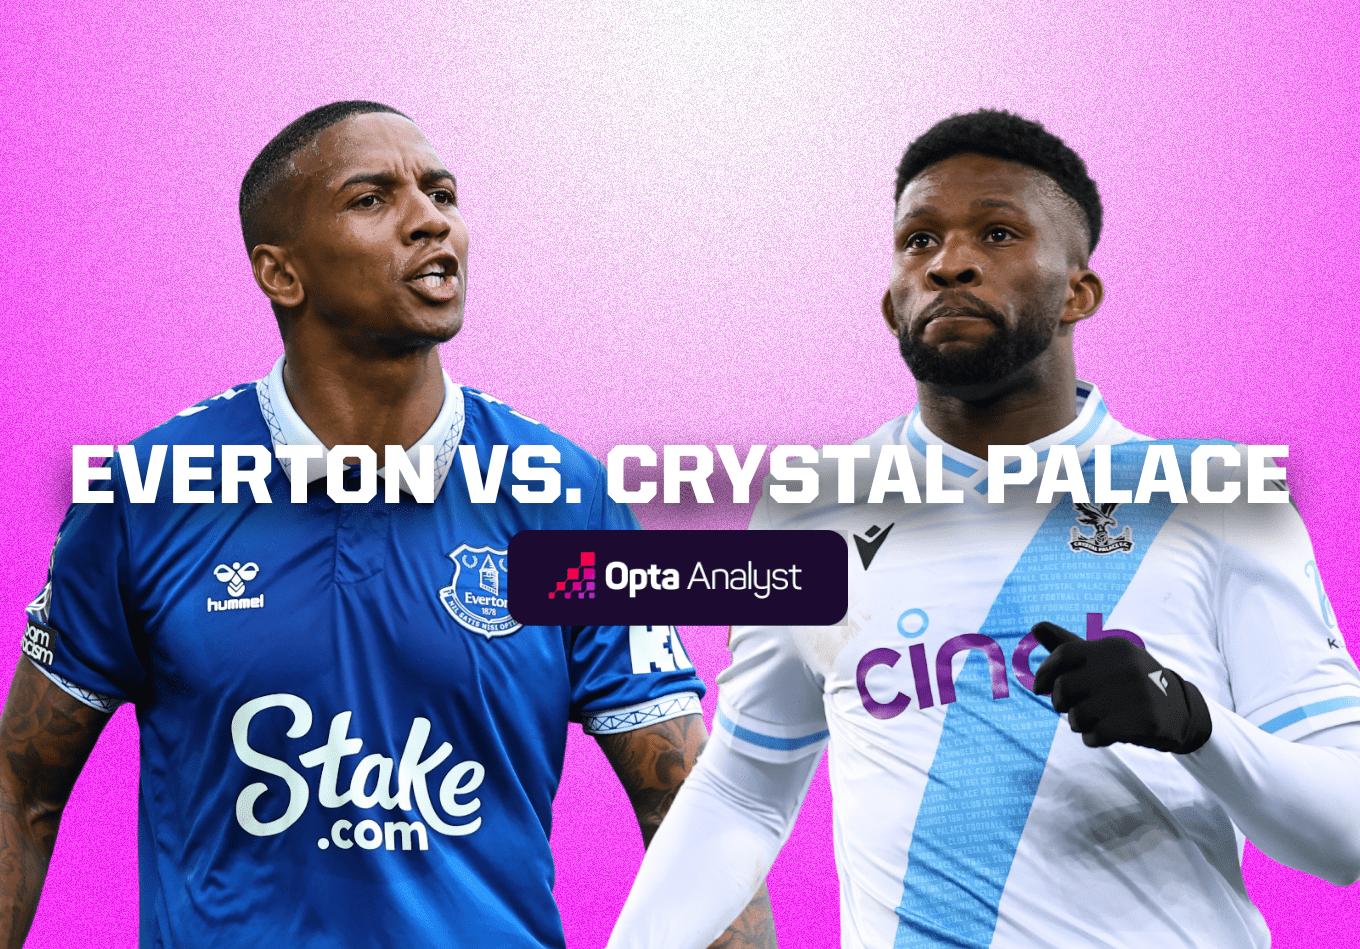 Everton vs Crystal Palace: Prediction and Preview